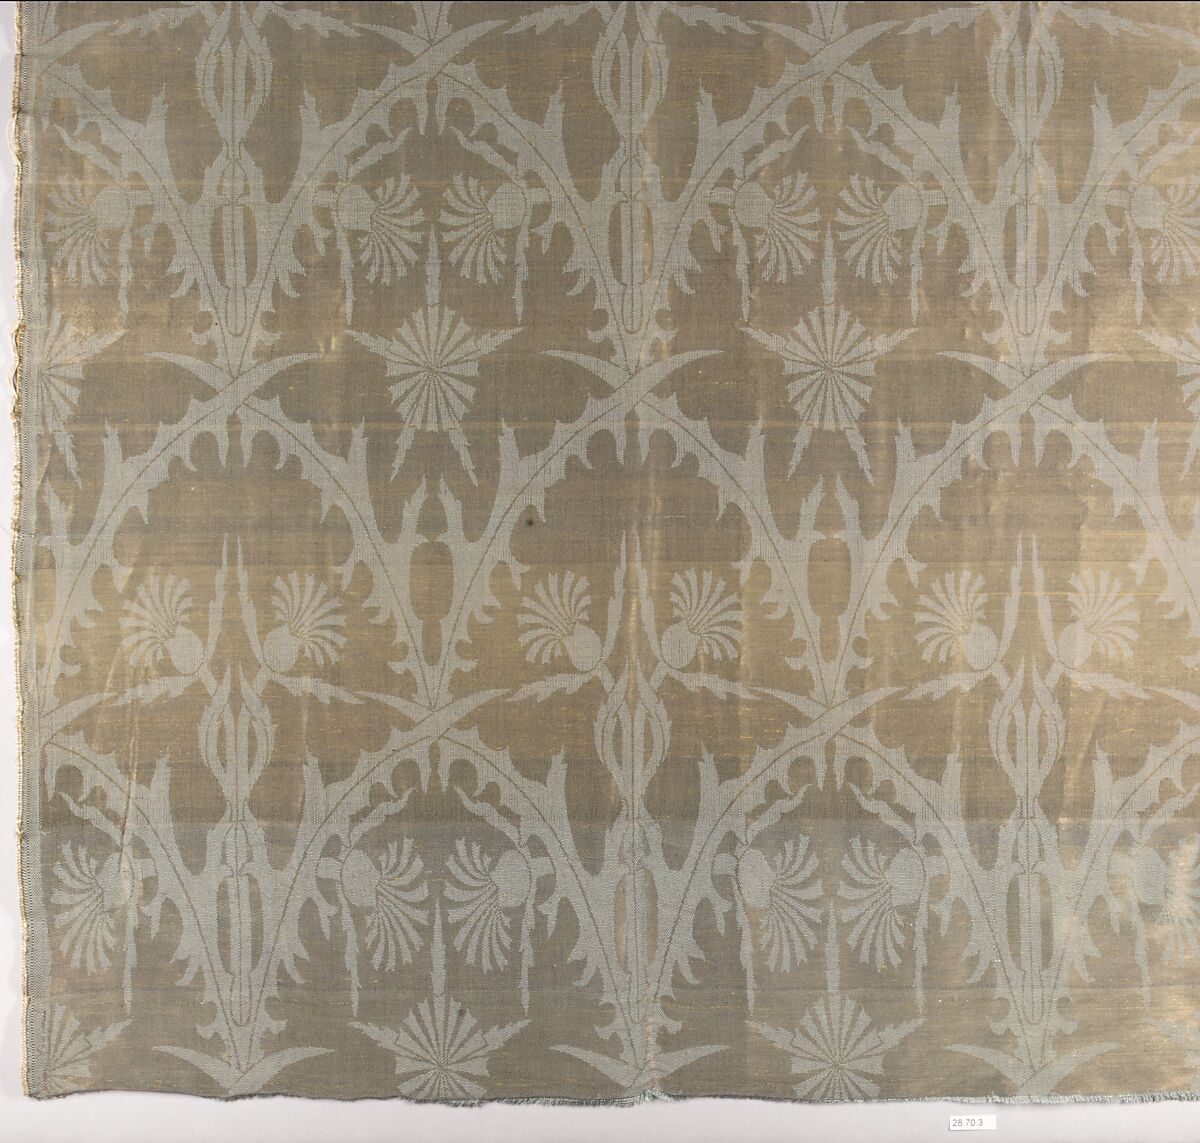 Thistle textile, Tiffany & Wheeler, Silk and metal threads, damask, woven, American